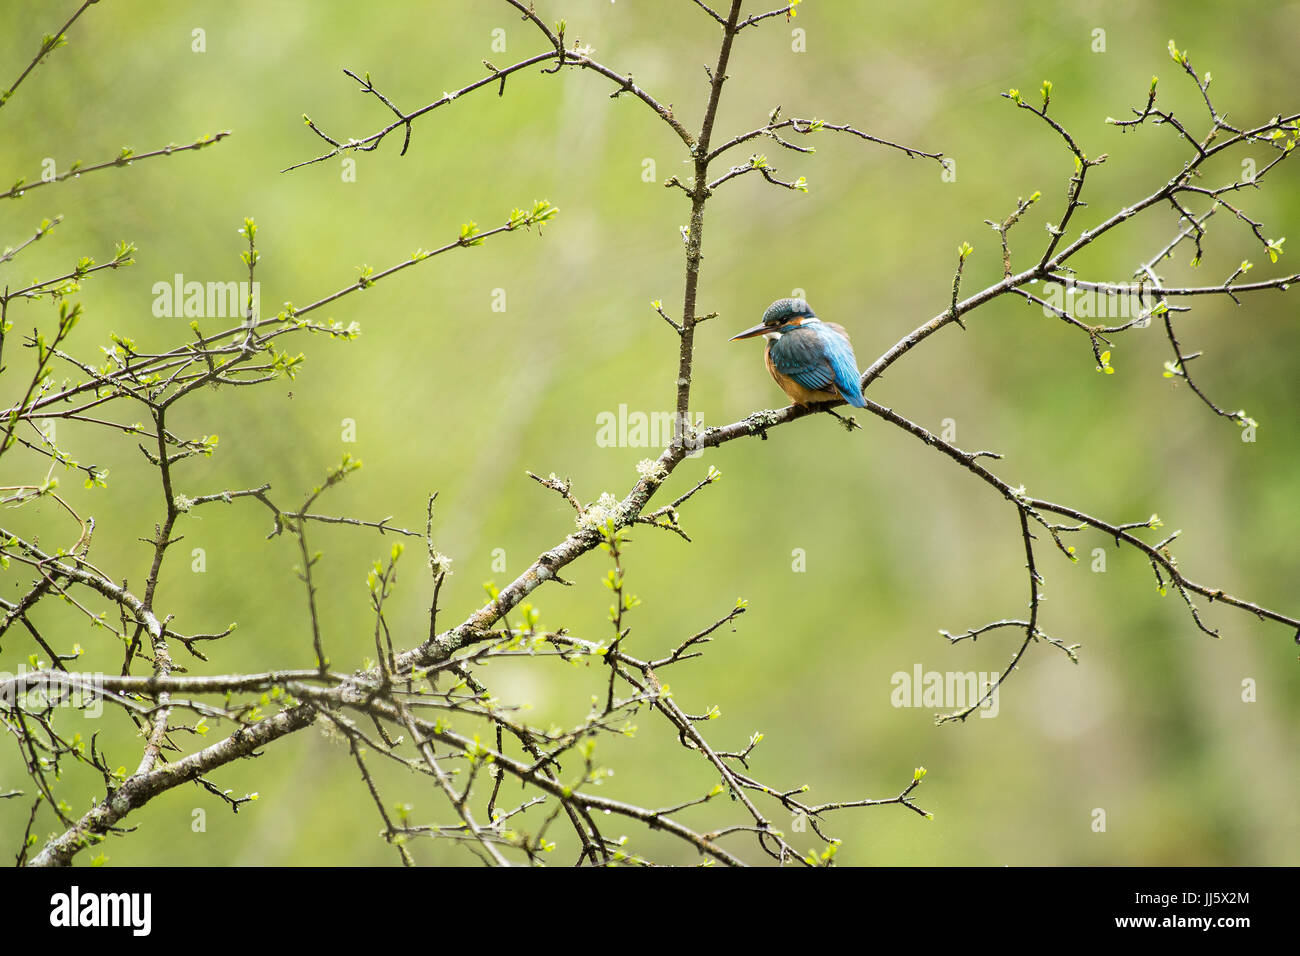 Kingfisher sitting on a branch Stock Photo